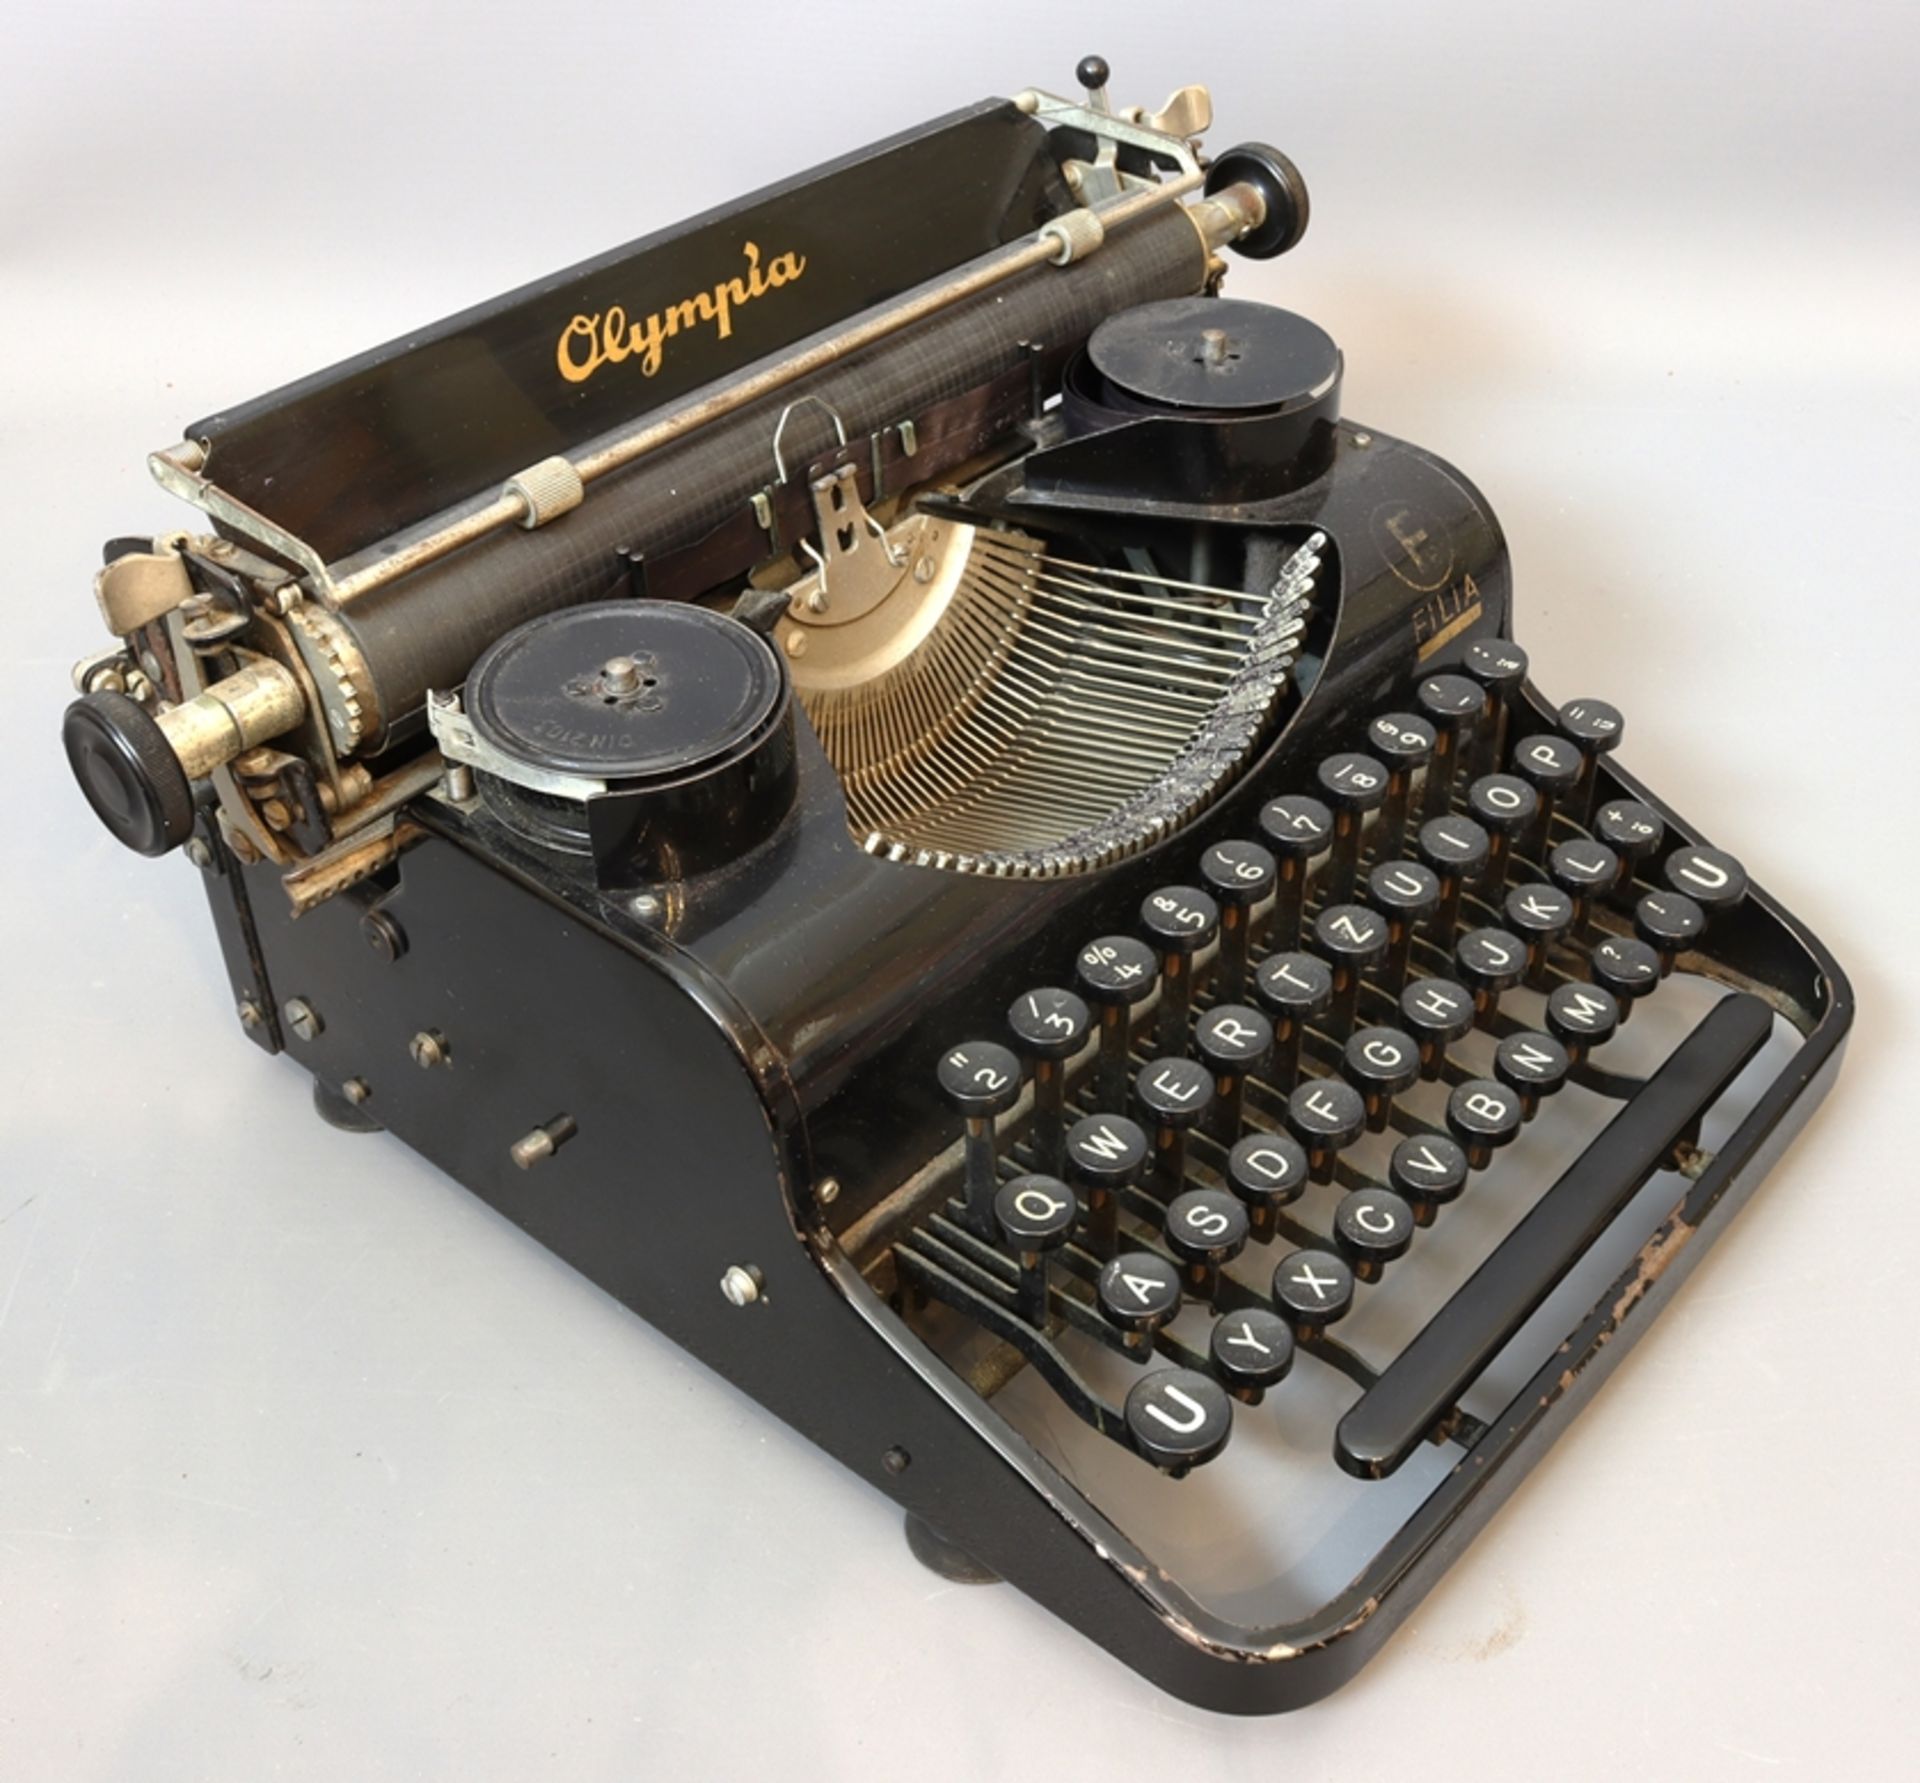 Typewriter Olympia, early 20th century, German - Image 2 of 2